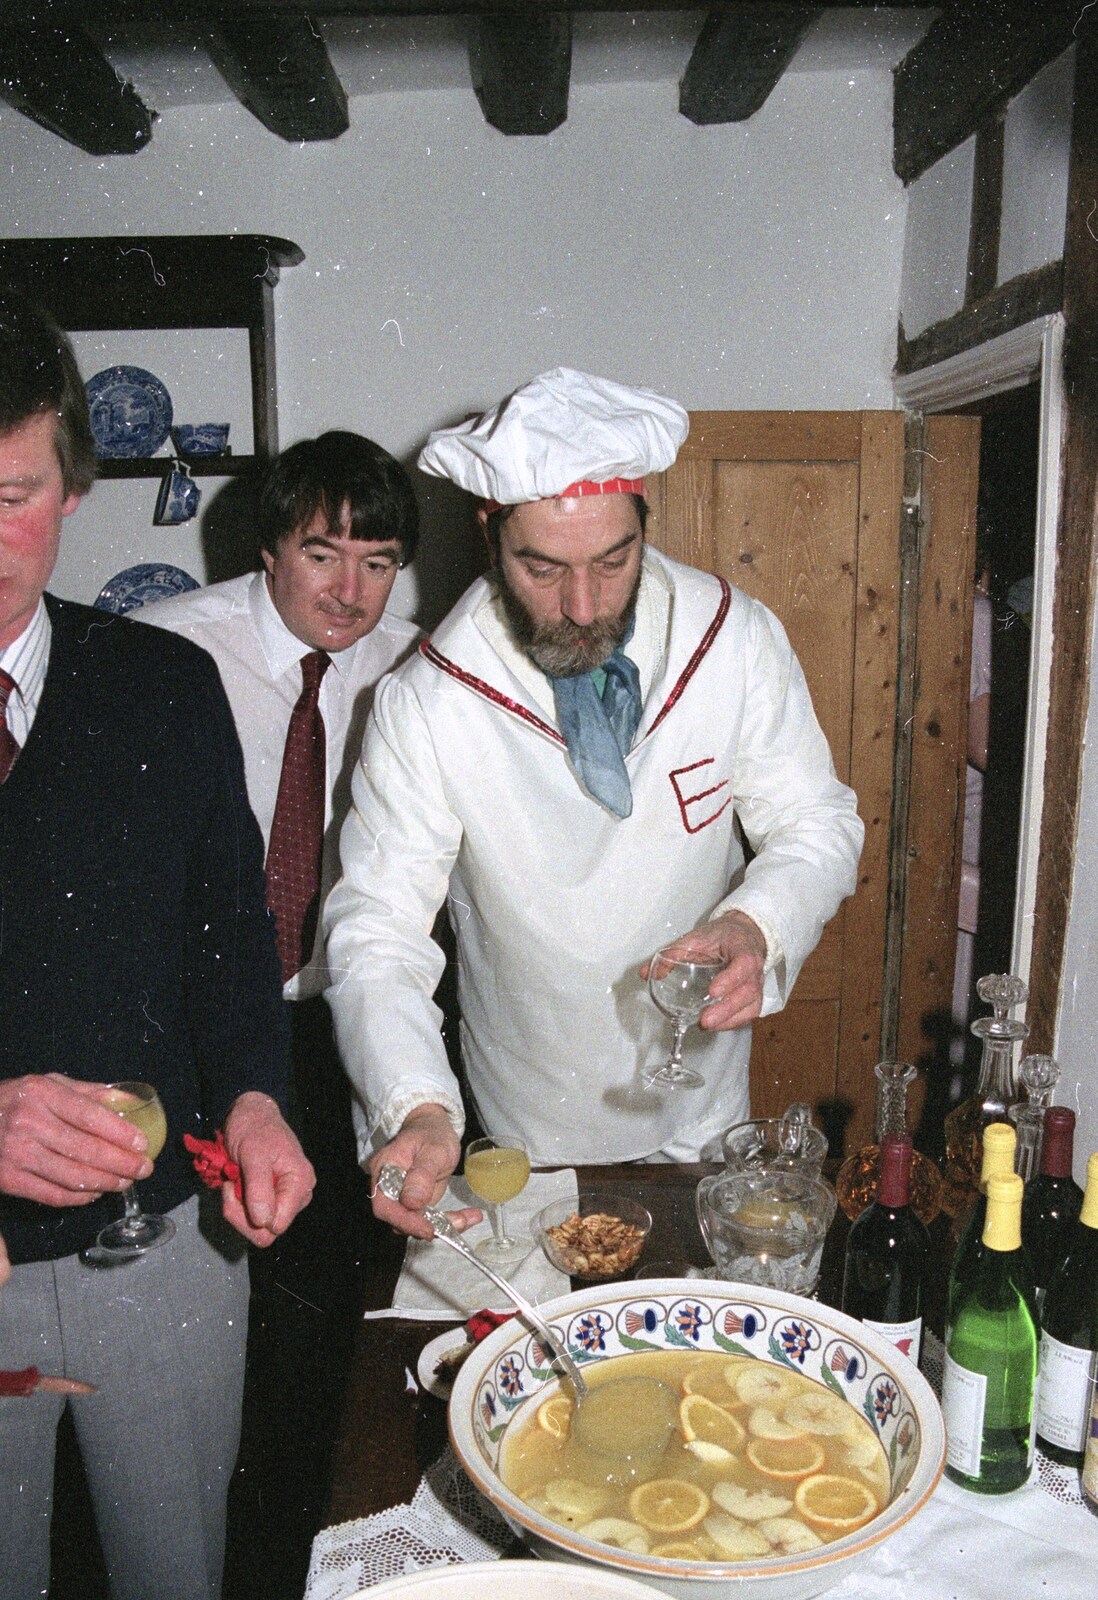 A top up with the fruit punch from Pancake Day in Starston, Norfolk - 27th February 1990